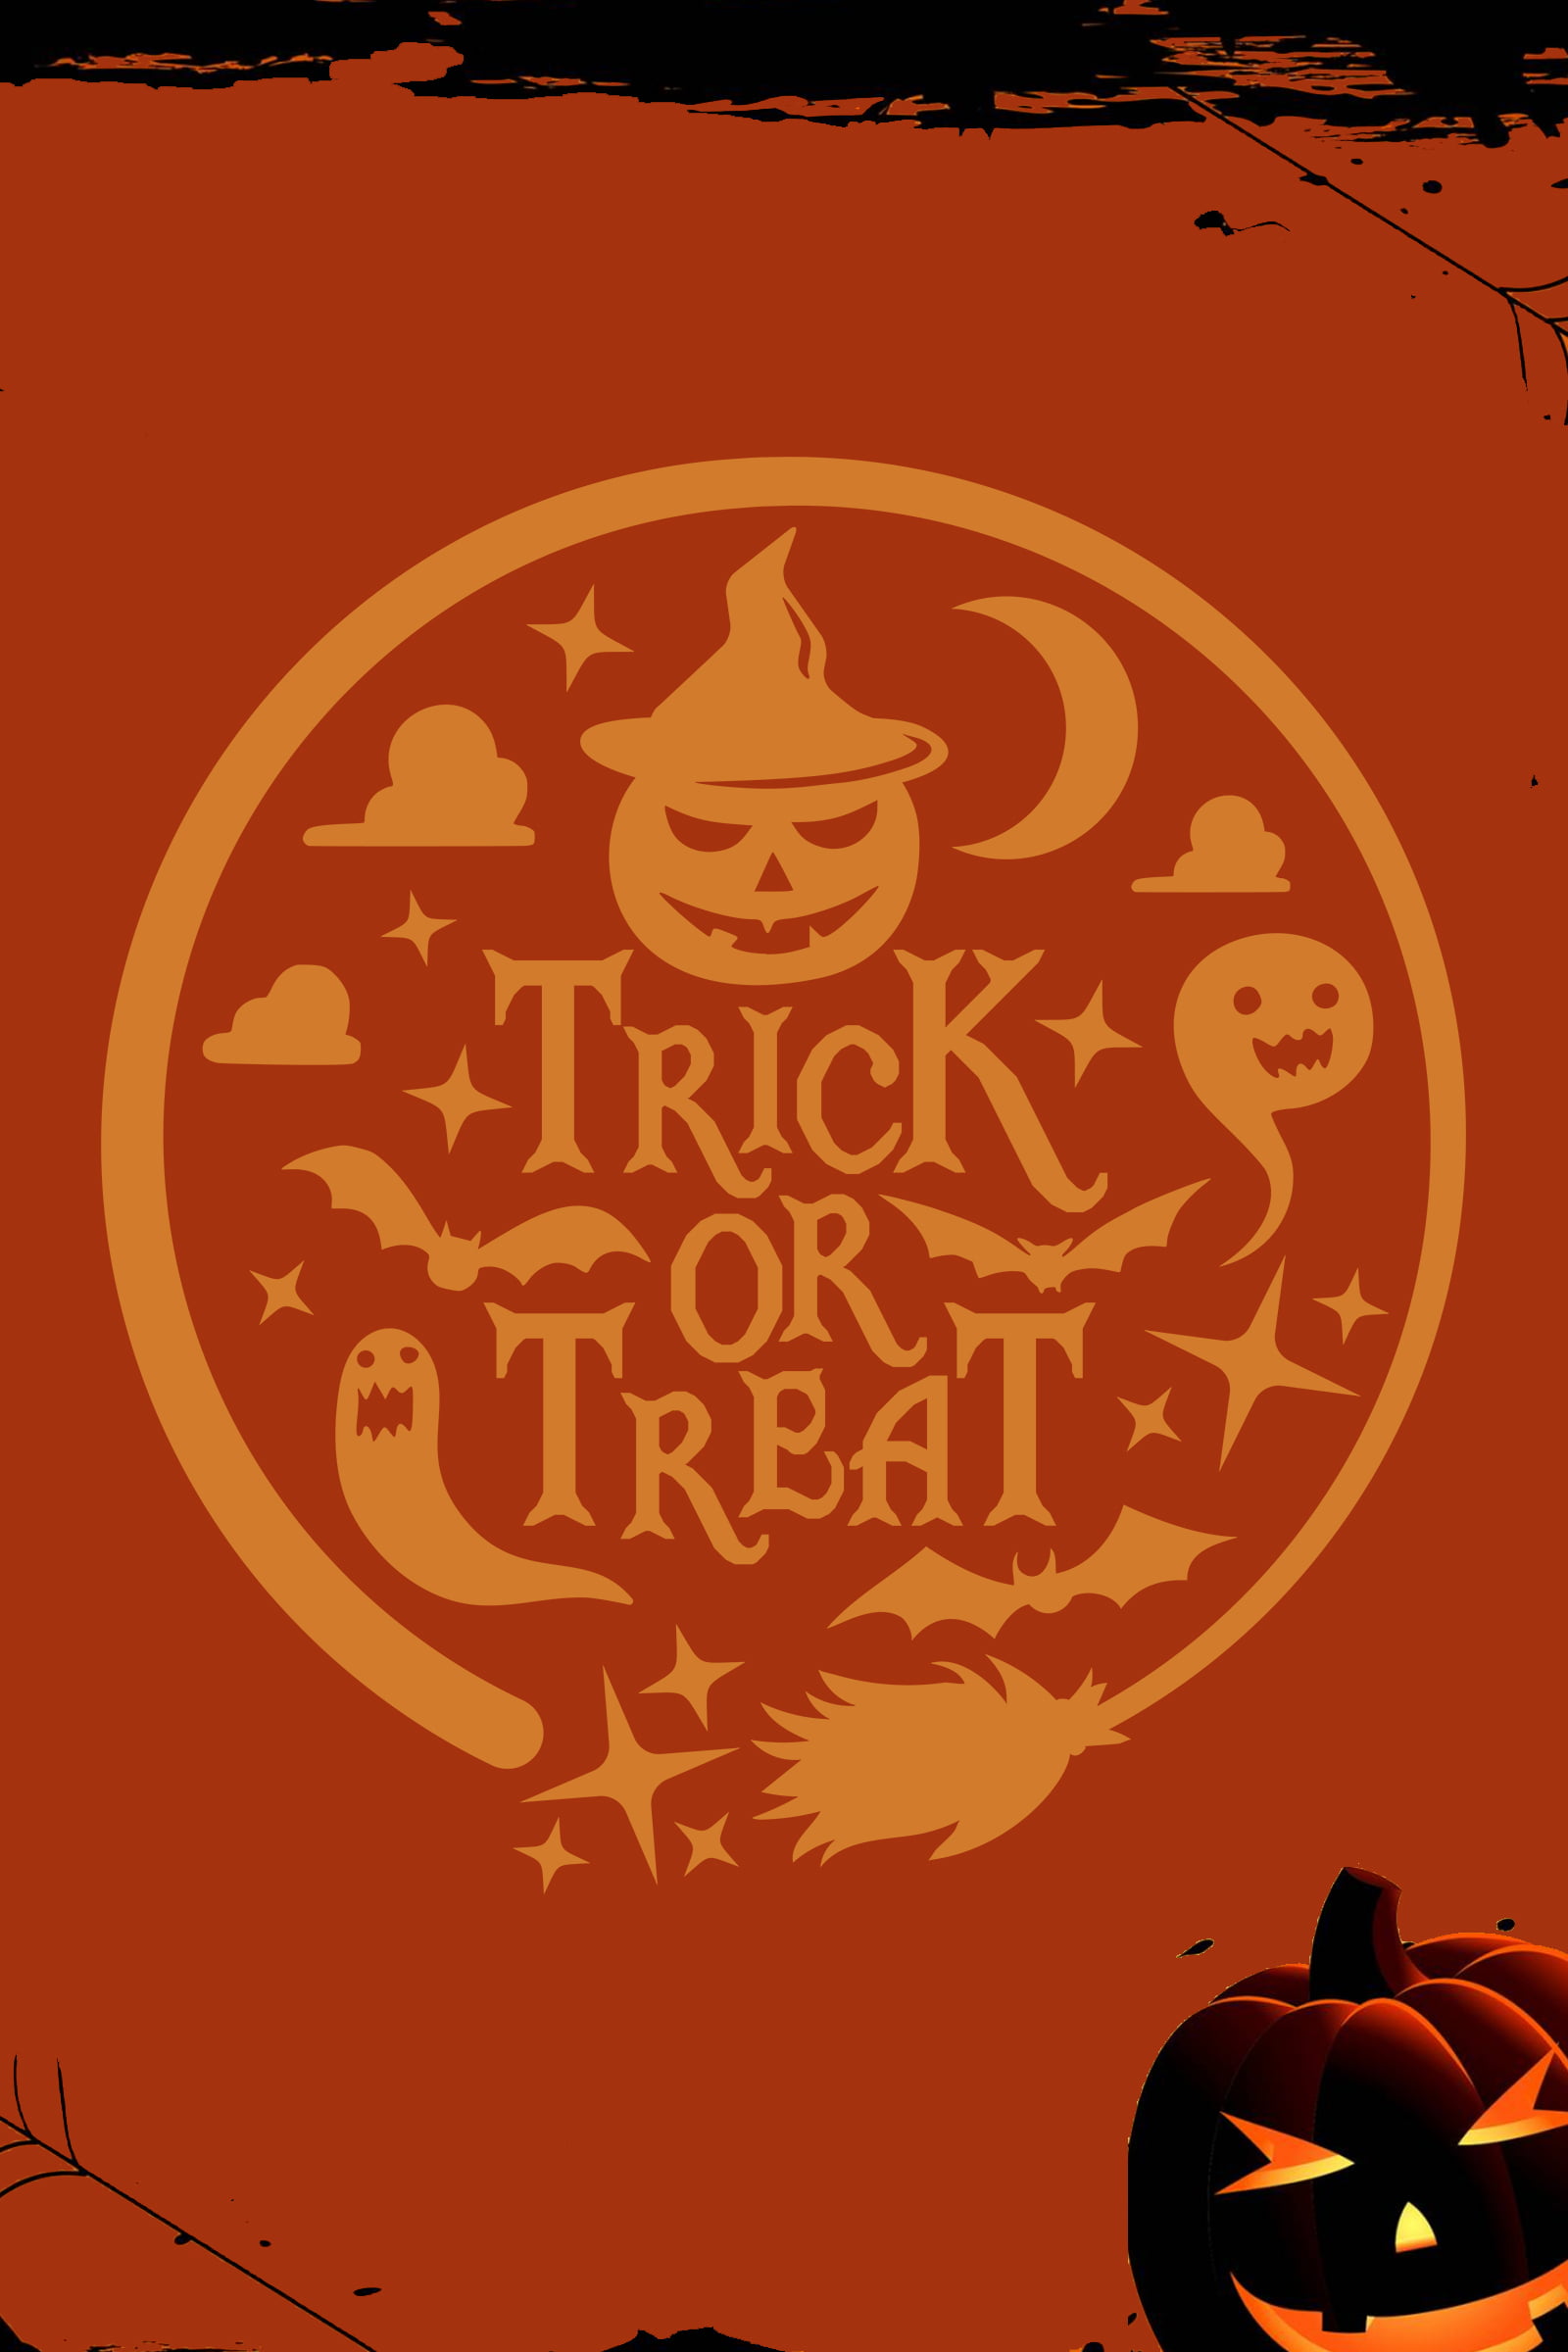 funniest image of trick or treat for her